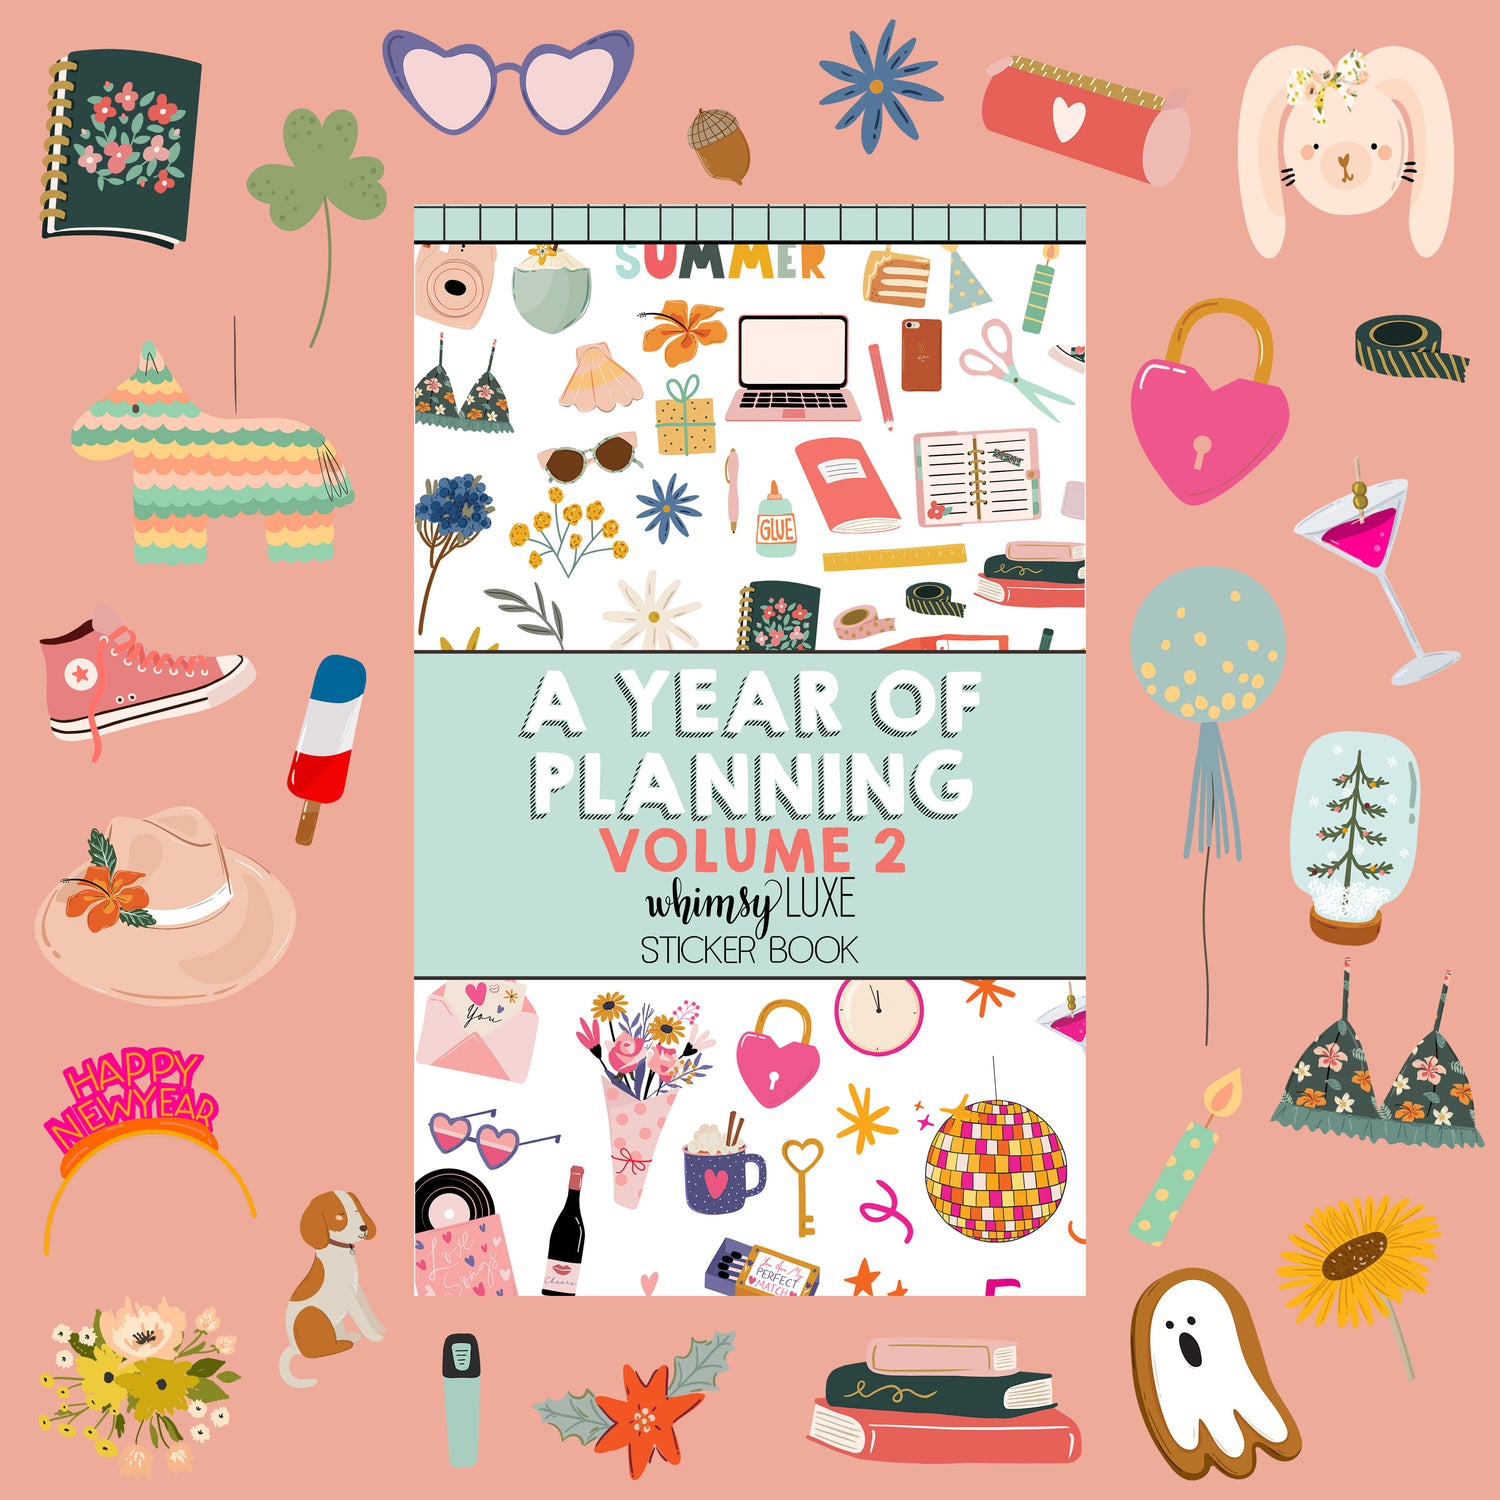 * A Year of Planning Volume 2